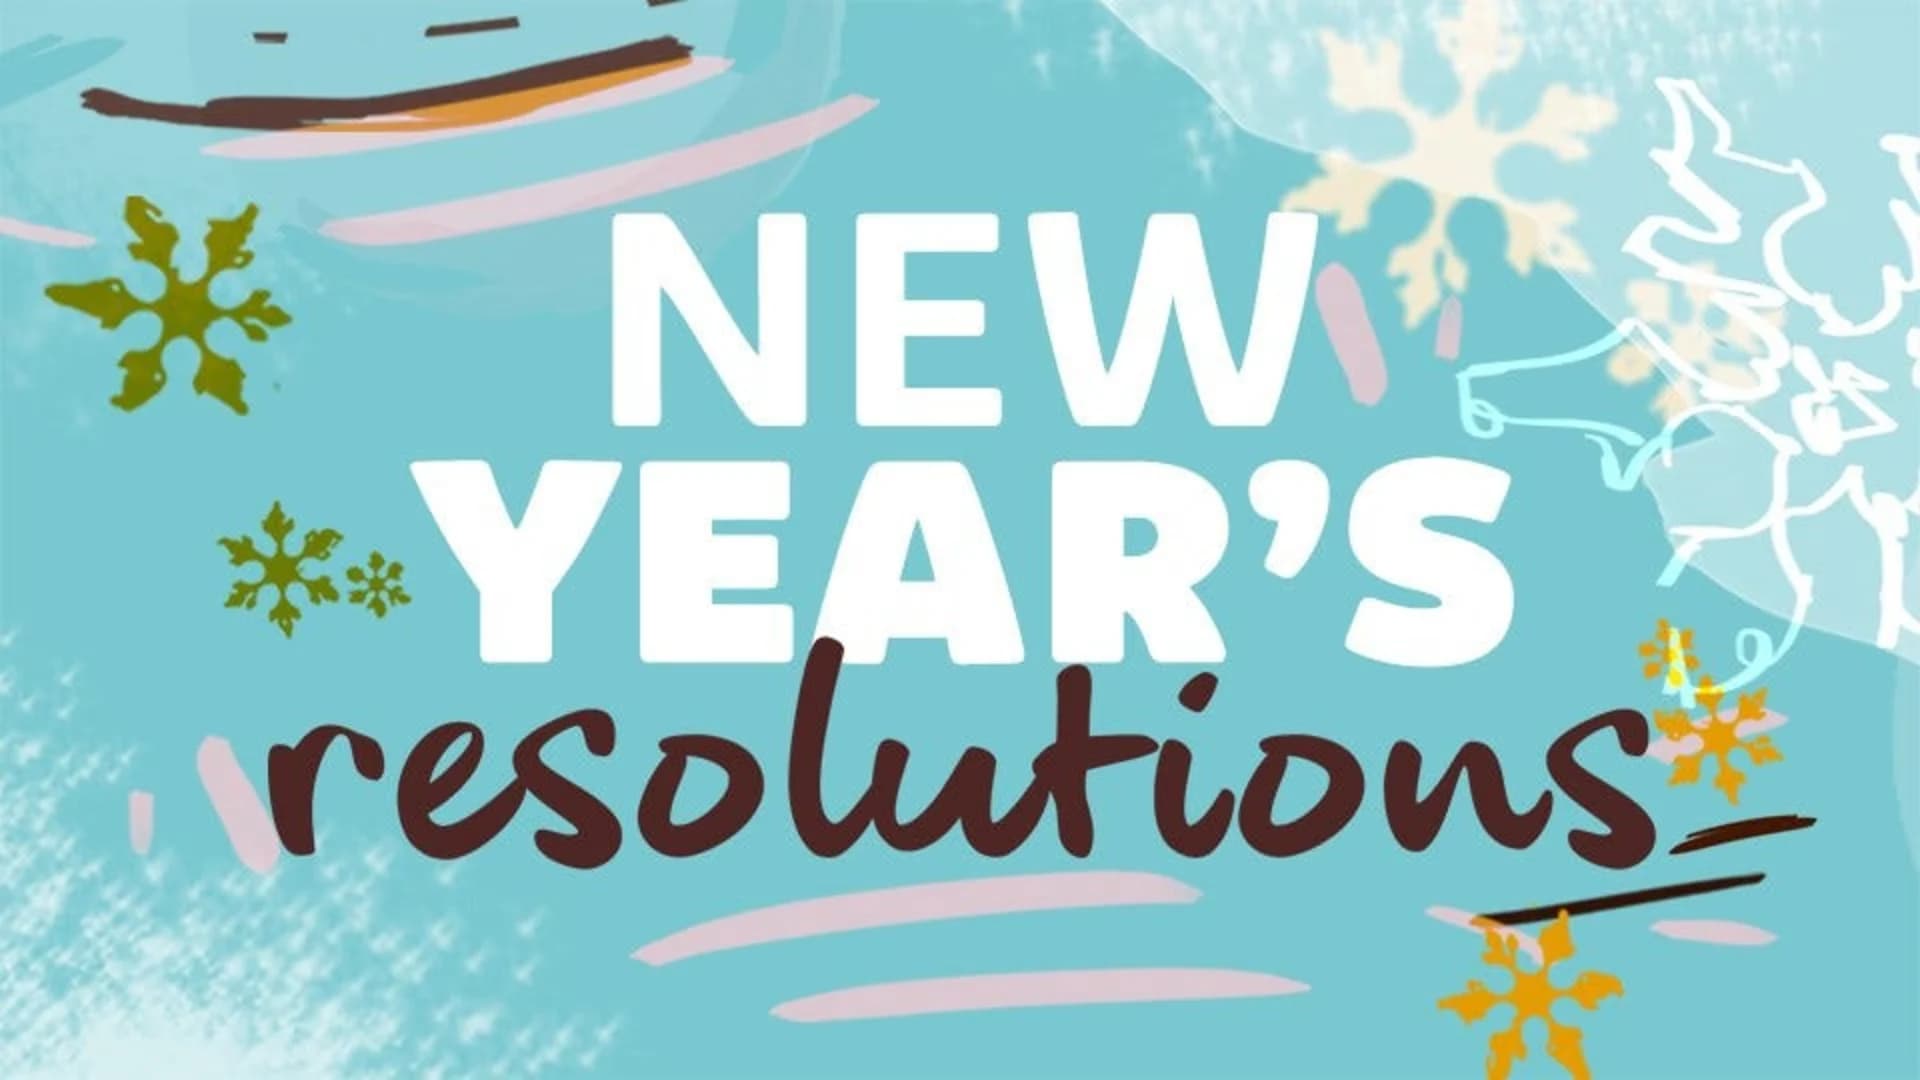 Tell us your 2020 New Year's resolutions!